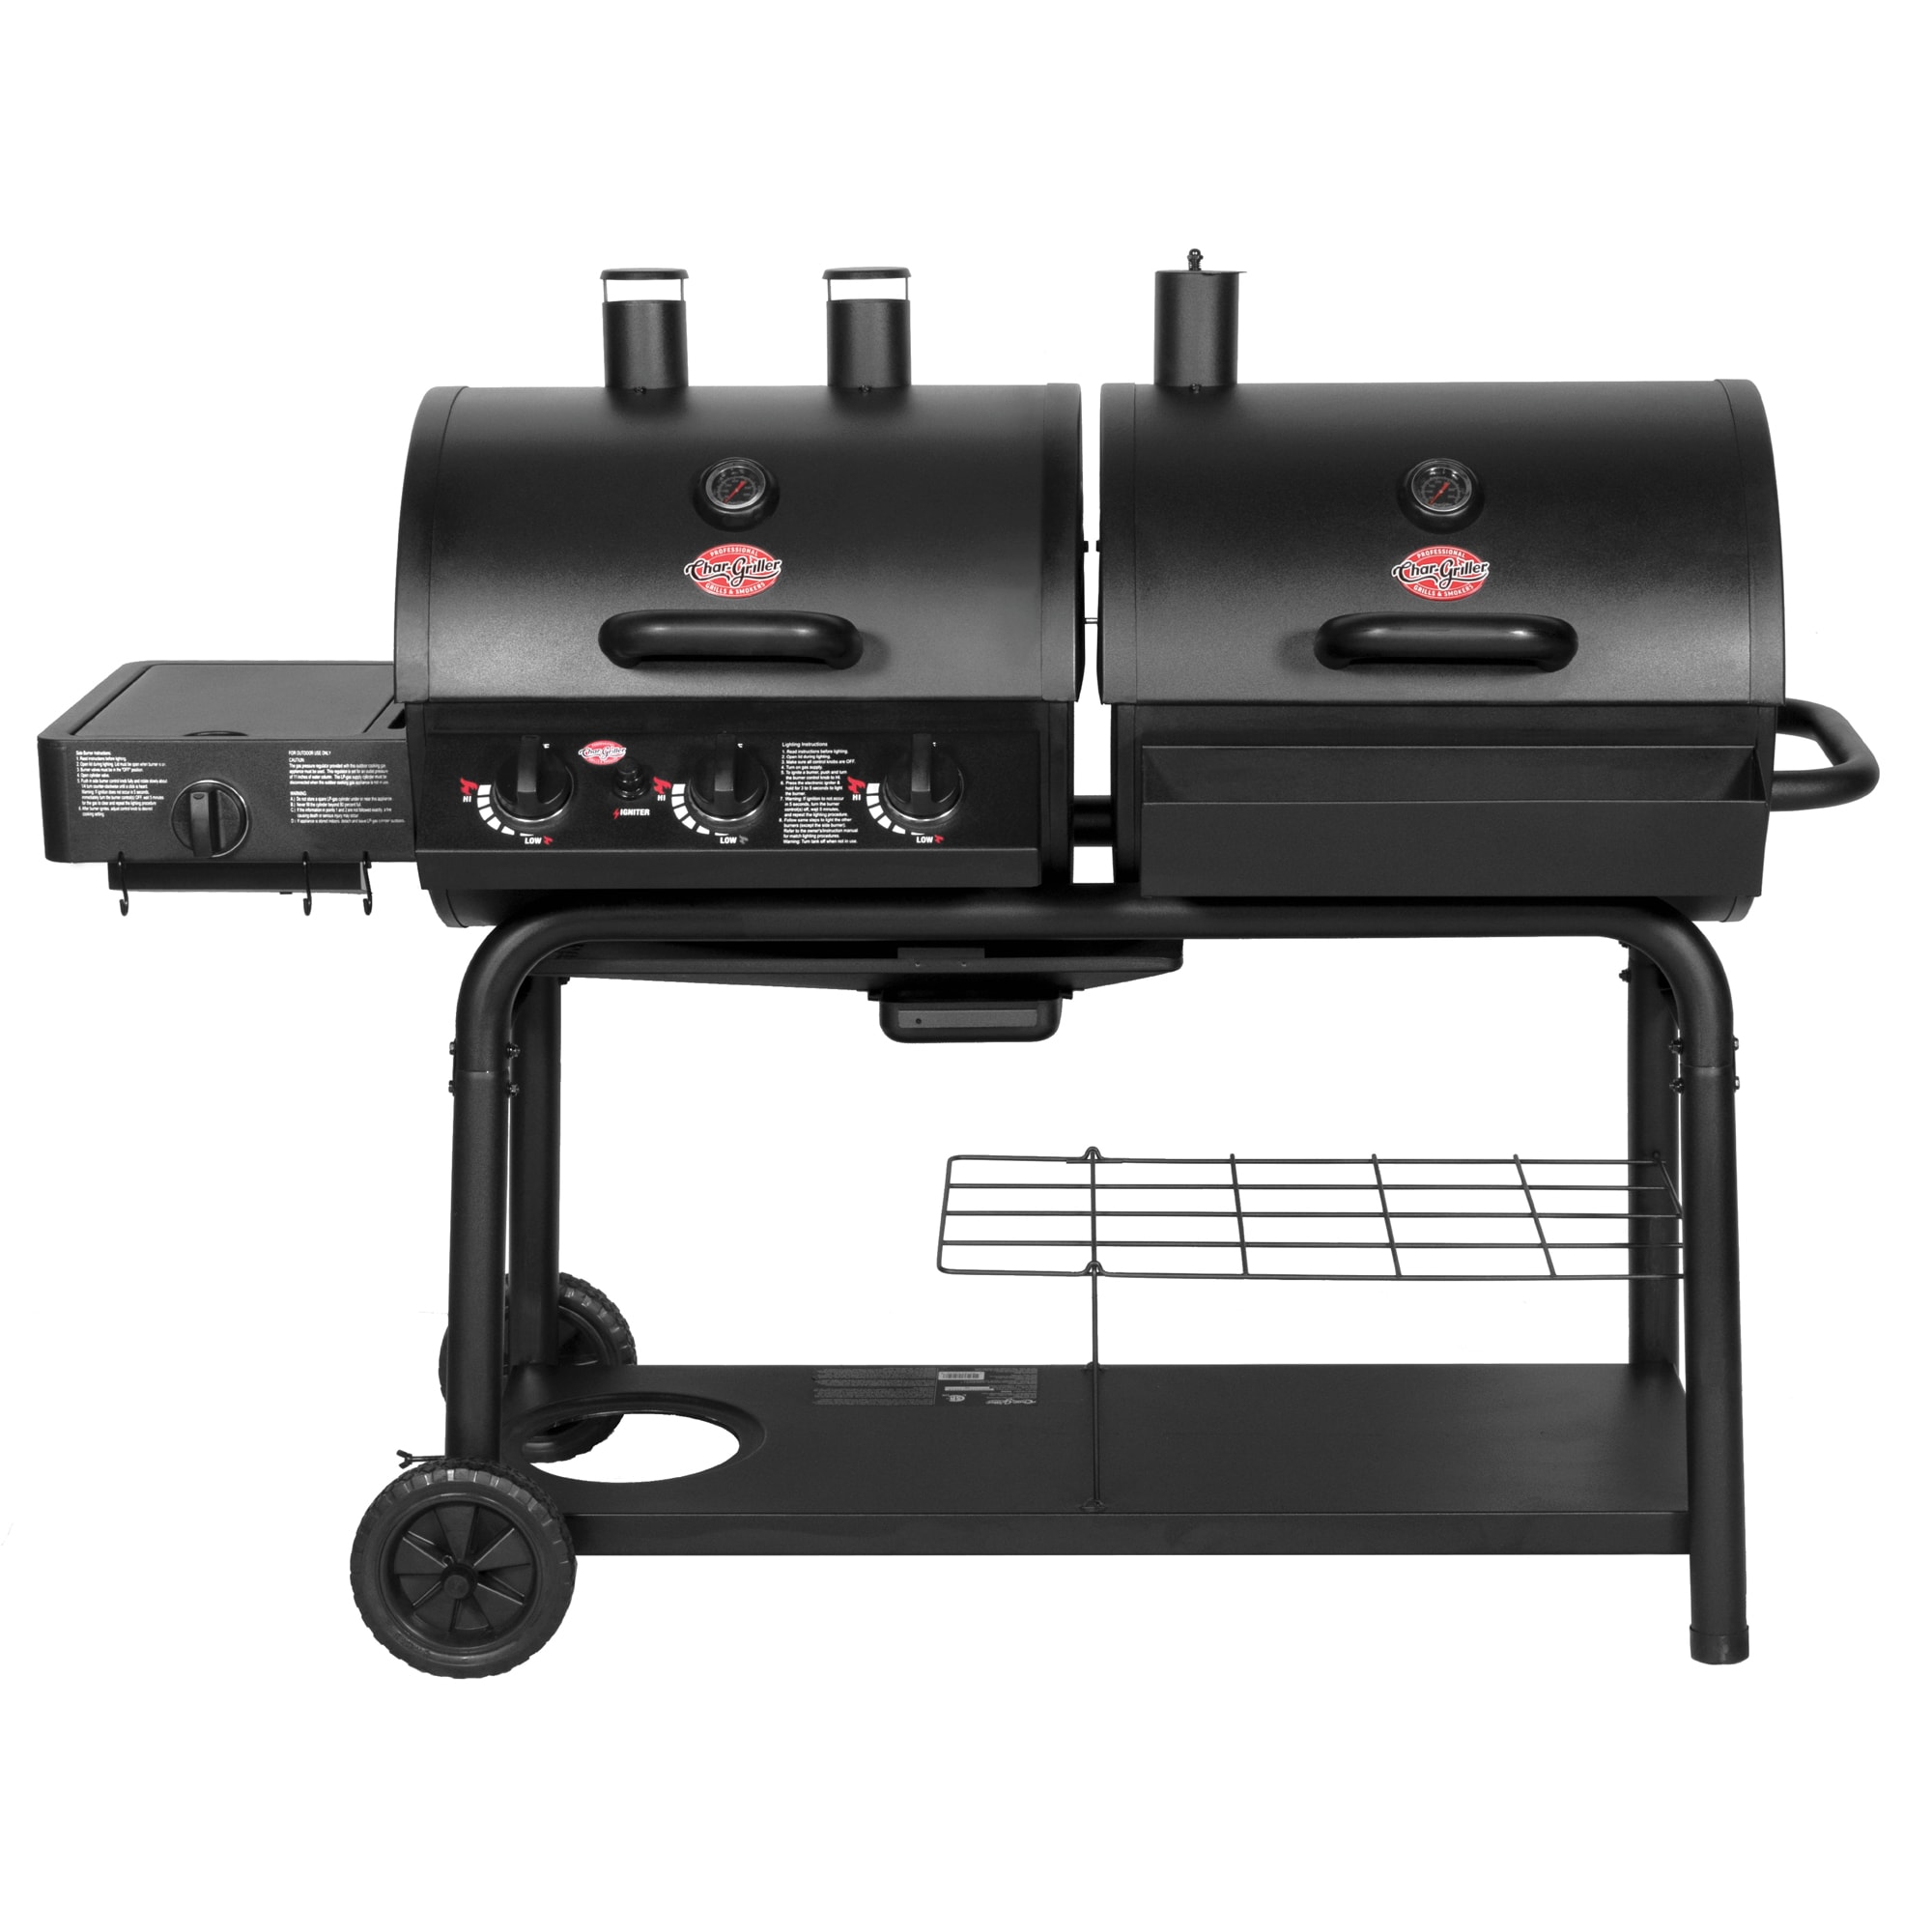 Duo Black Combo Grill in Combo Grills department at Lowes.com